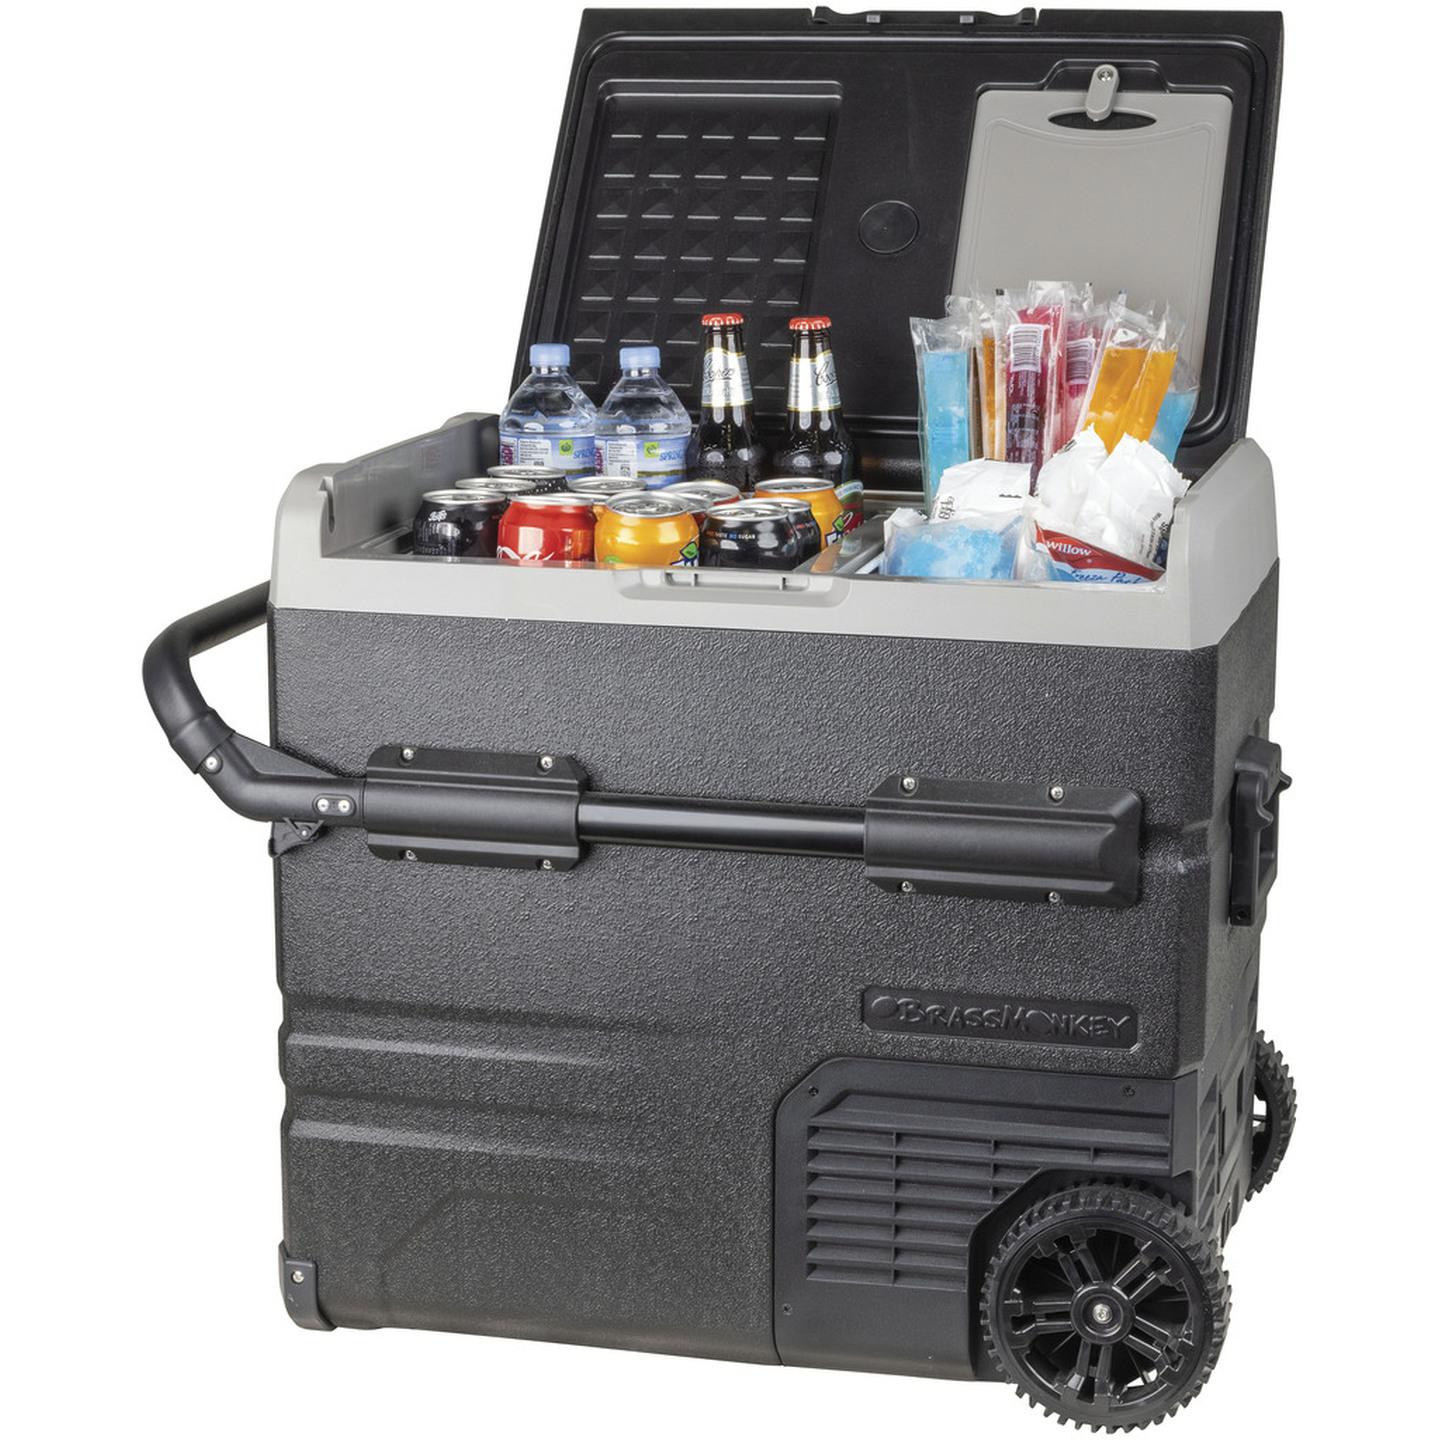 55L Brass Monkey Portable Dual Zone Fridge/Freezer with Wheels and Battery Compartment